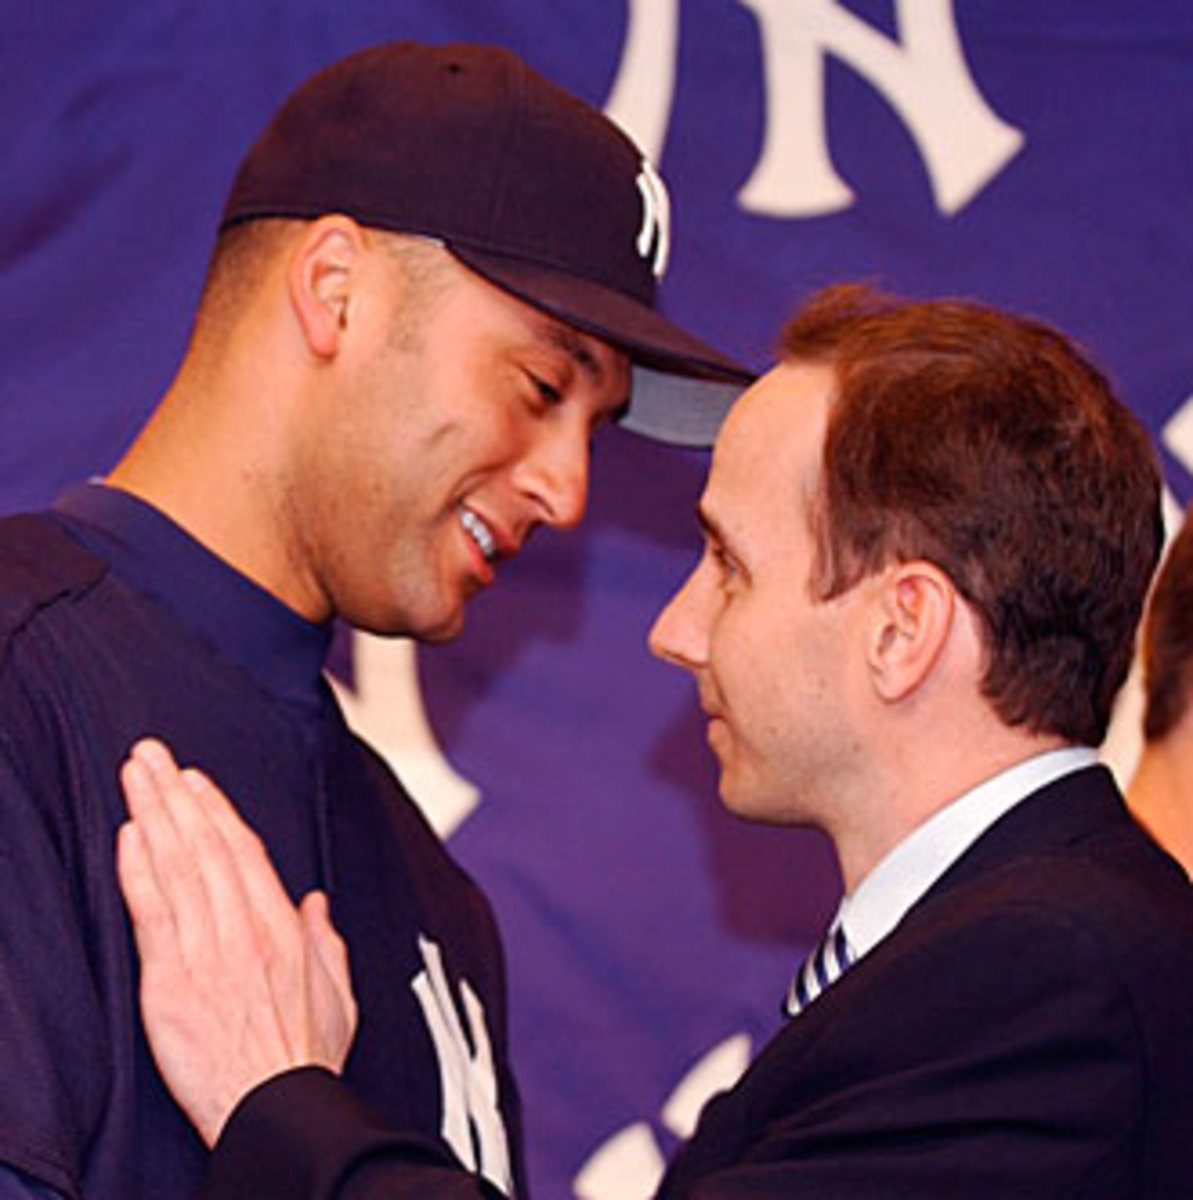 Derek Jeter was all smiles when he was named Yankees captain in 2003, but he took exception to Cashman's blunt appraisal of his skills seven years later.